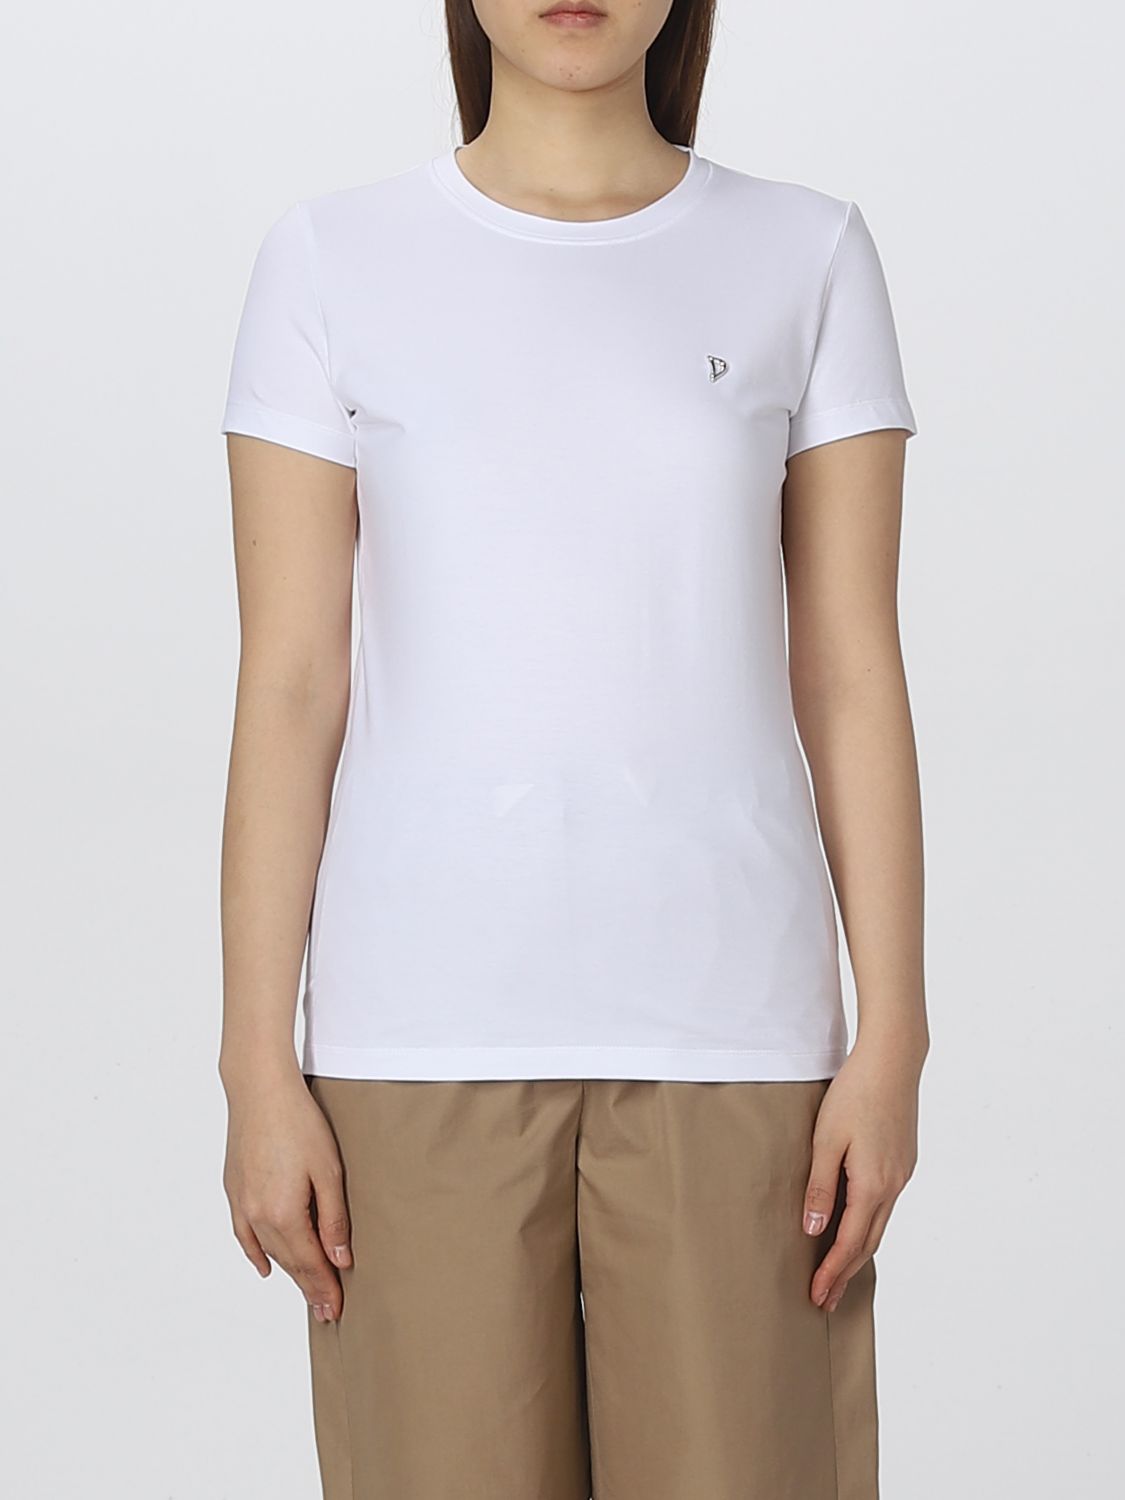 Dondup Cotton T-shirt In White